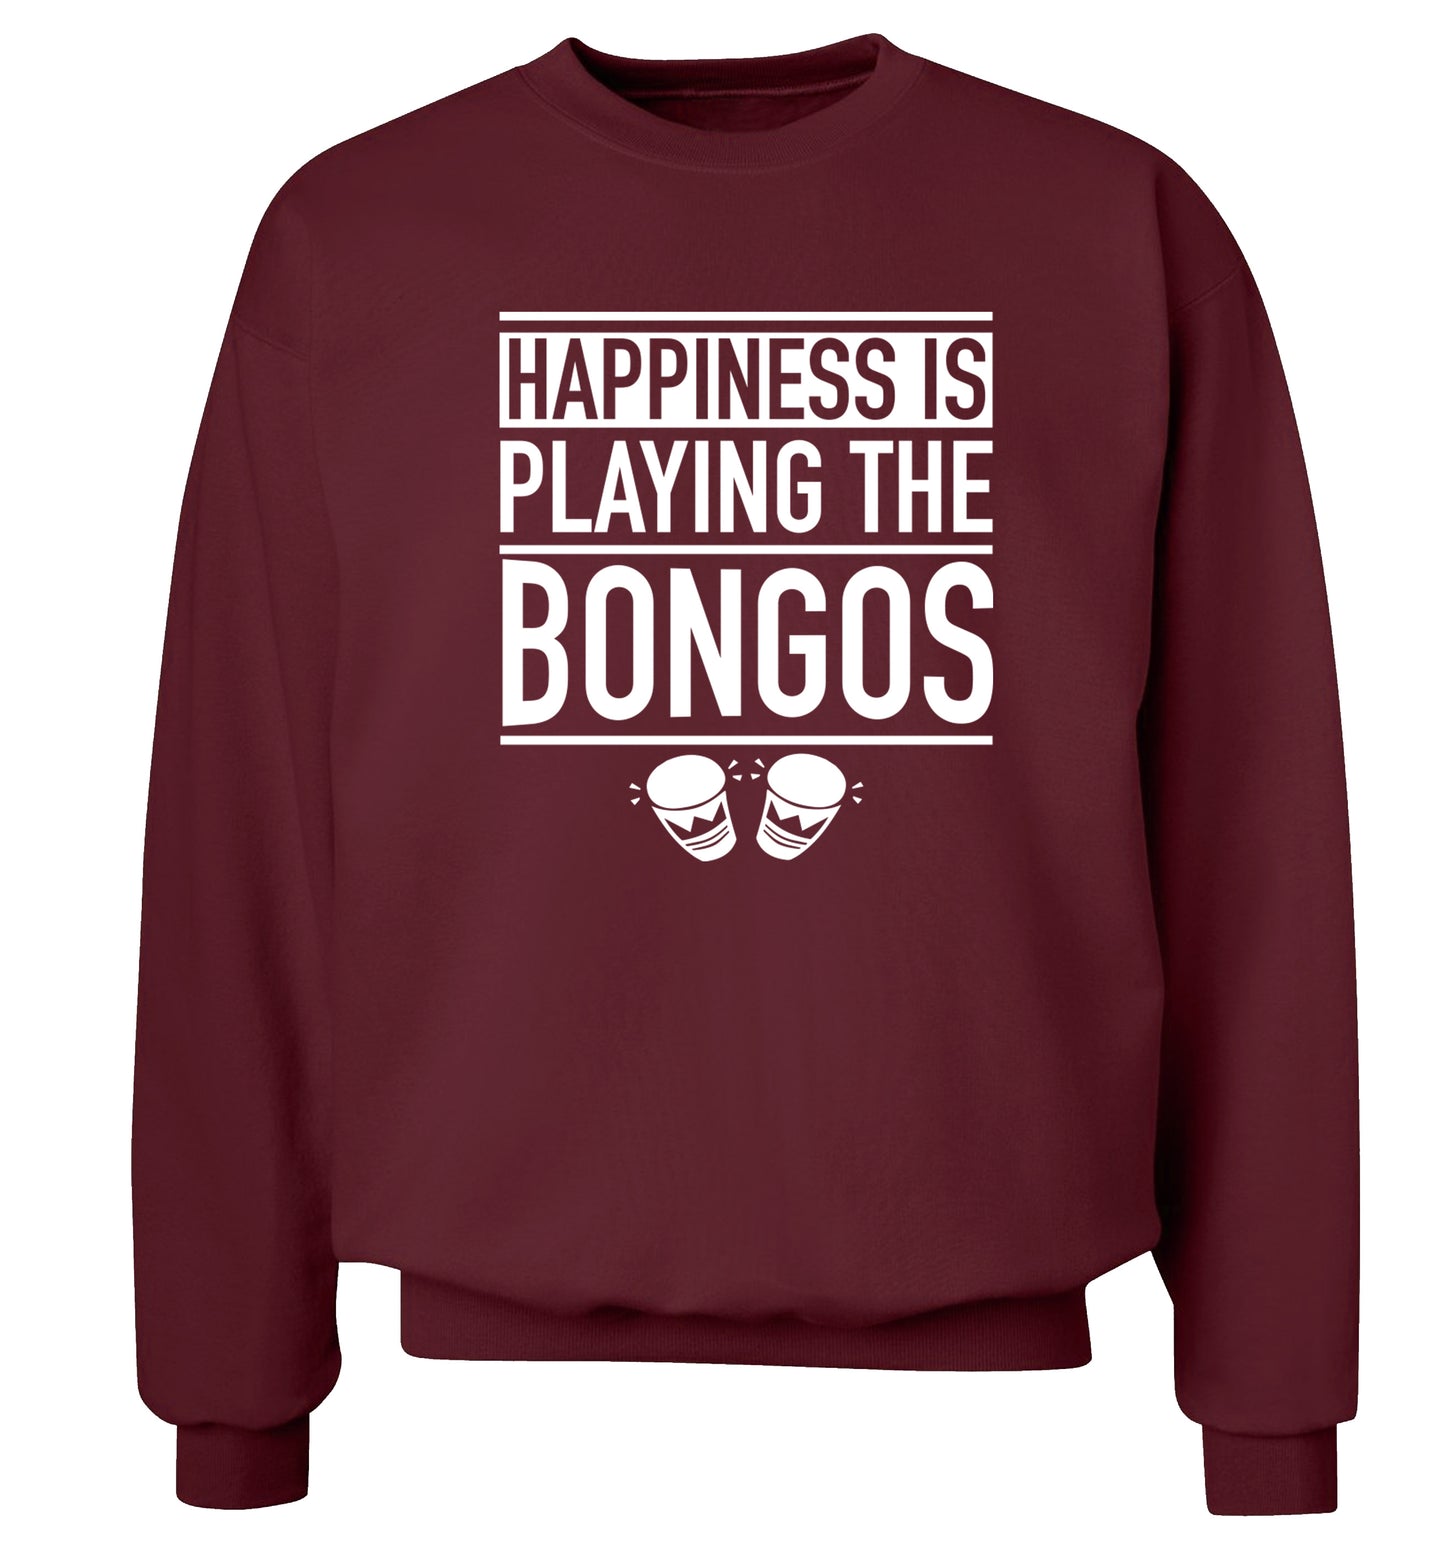 Happiness is playing the bongos Adult's unisex maroon Sweater 2XL